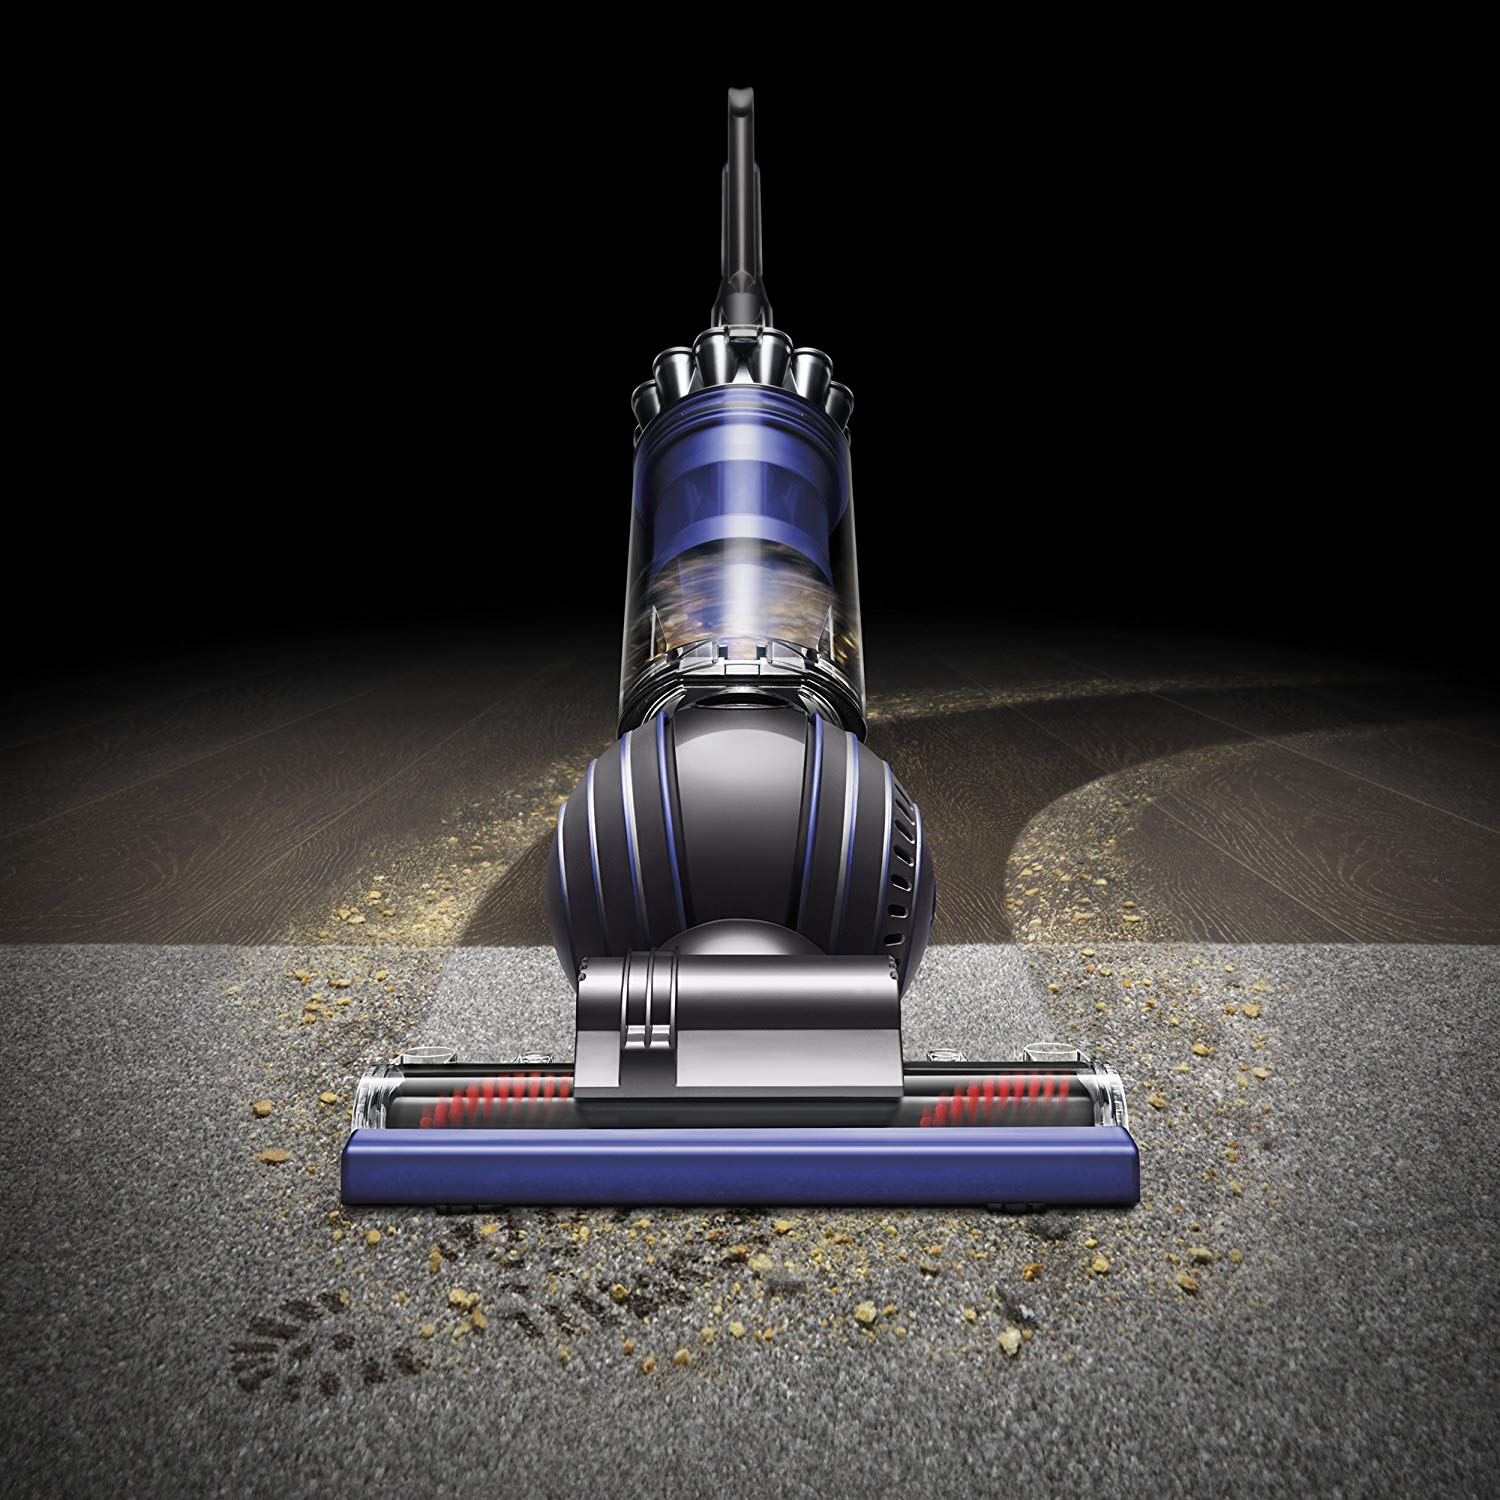 Dyson-Ball-Animal-2-Upright-Vacuum-Cleaner